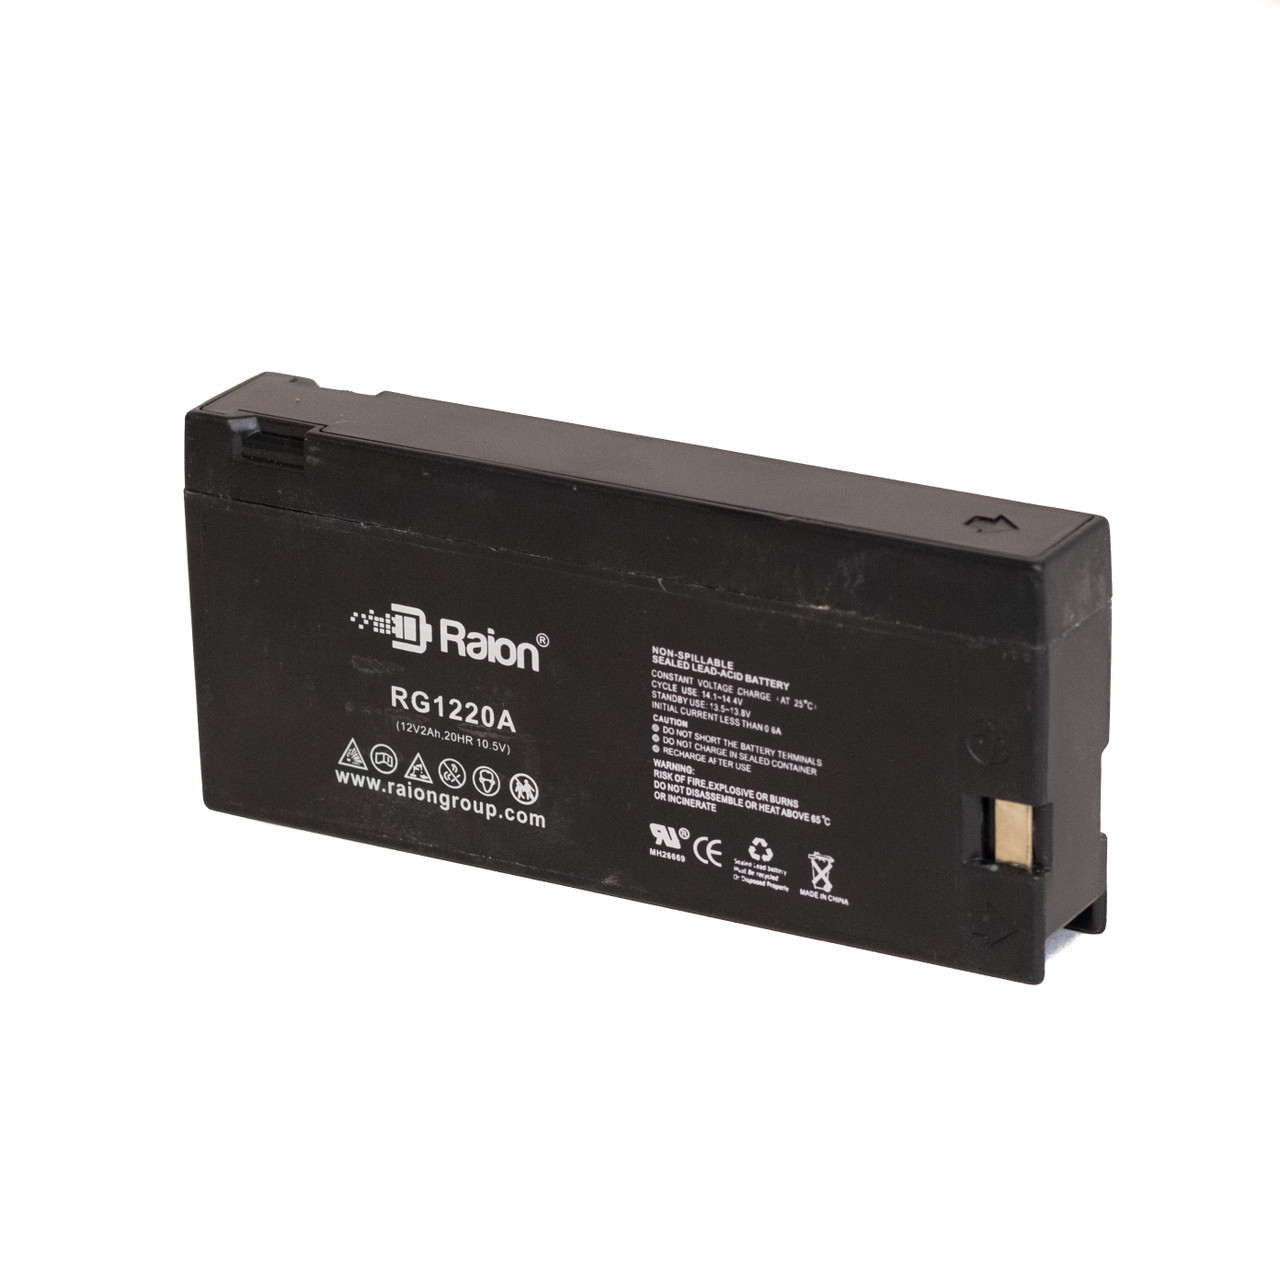 Raion Power RG1220A Replacement Battery for Magnavox Easycam H.S. Shutter CCD